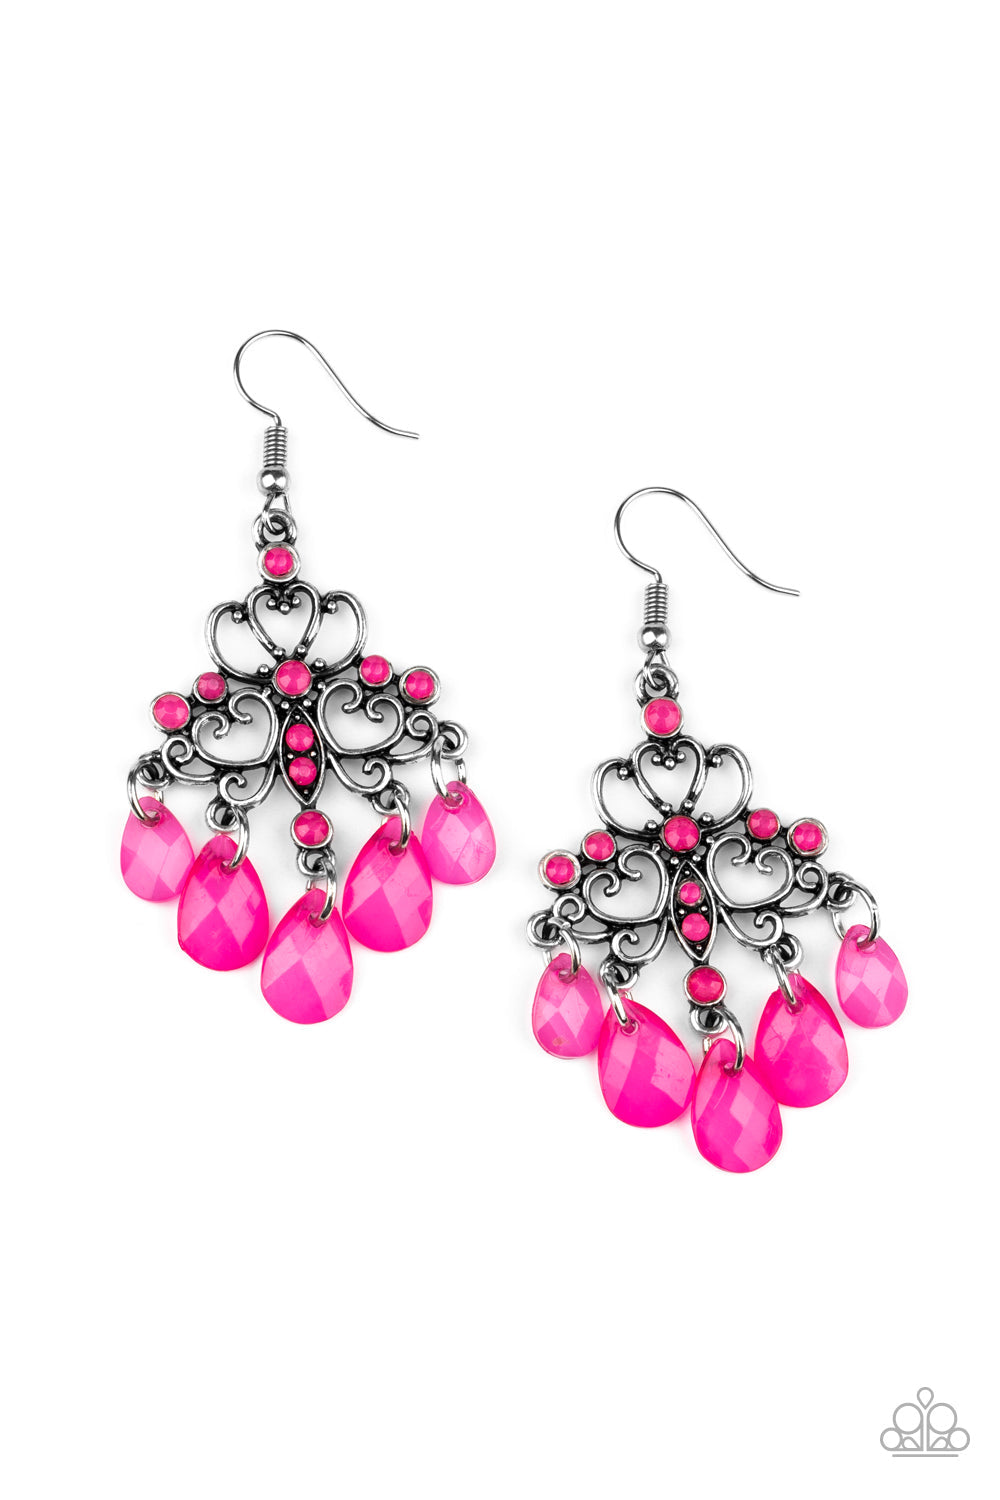 Sterling Silver Dark Pink Pearl Earrings - Available with Matching Necklace  and Other Metal Options